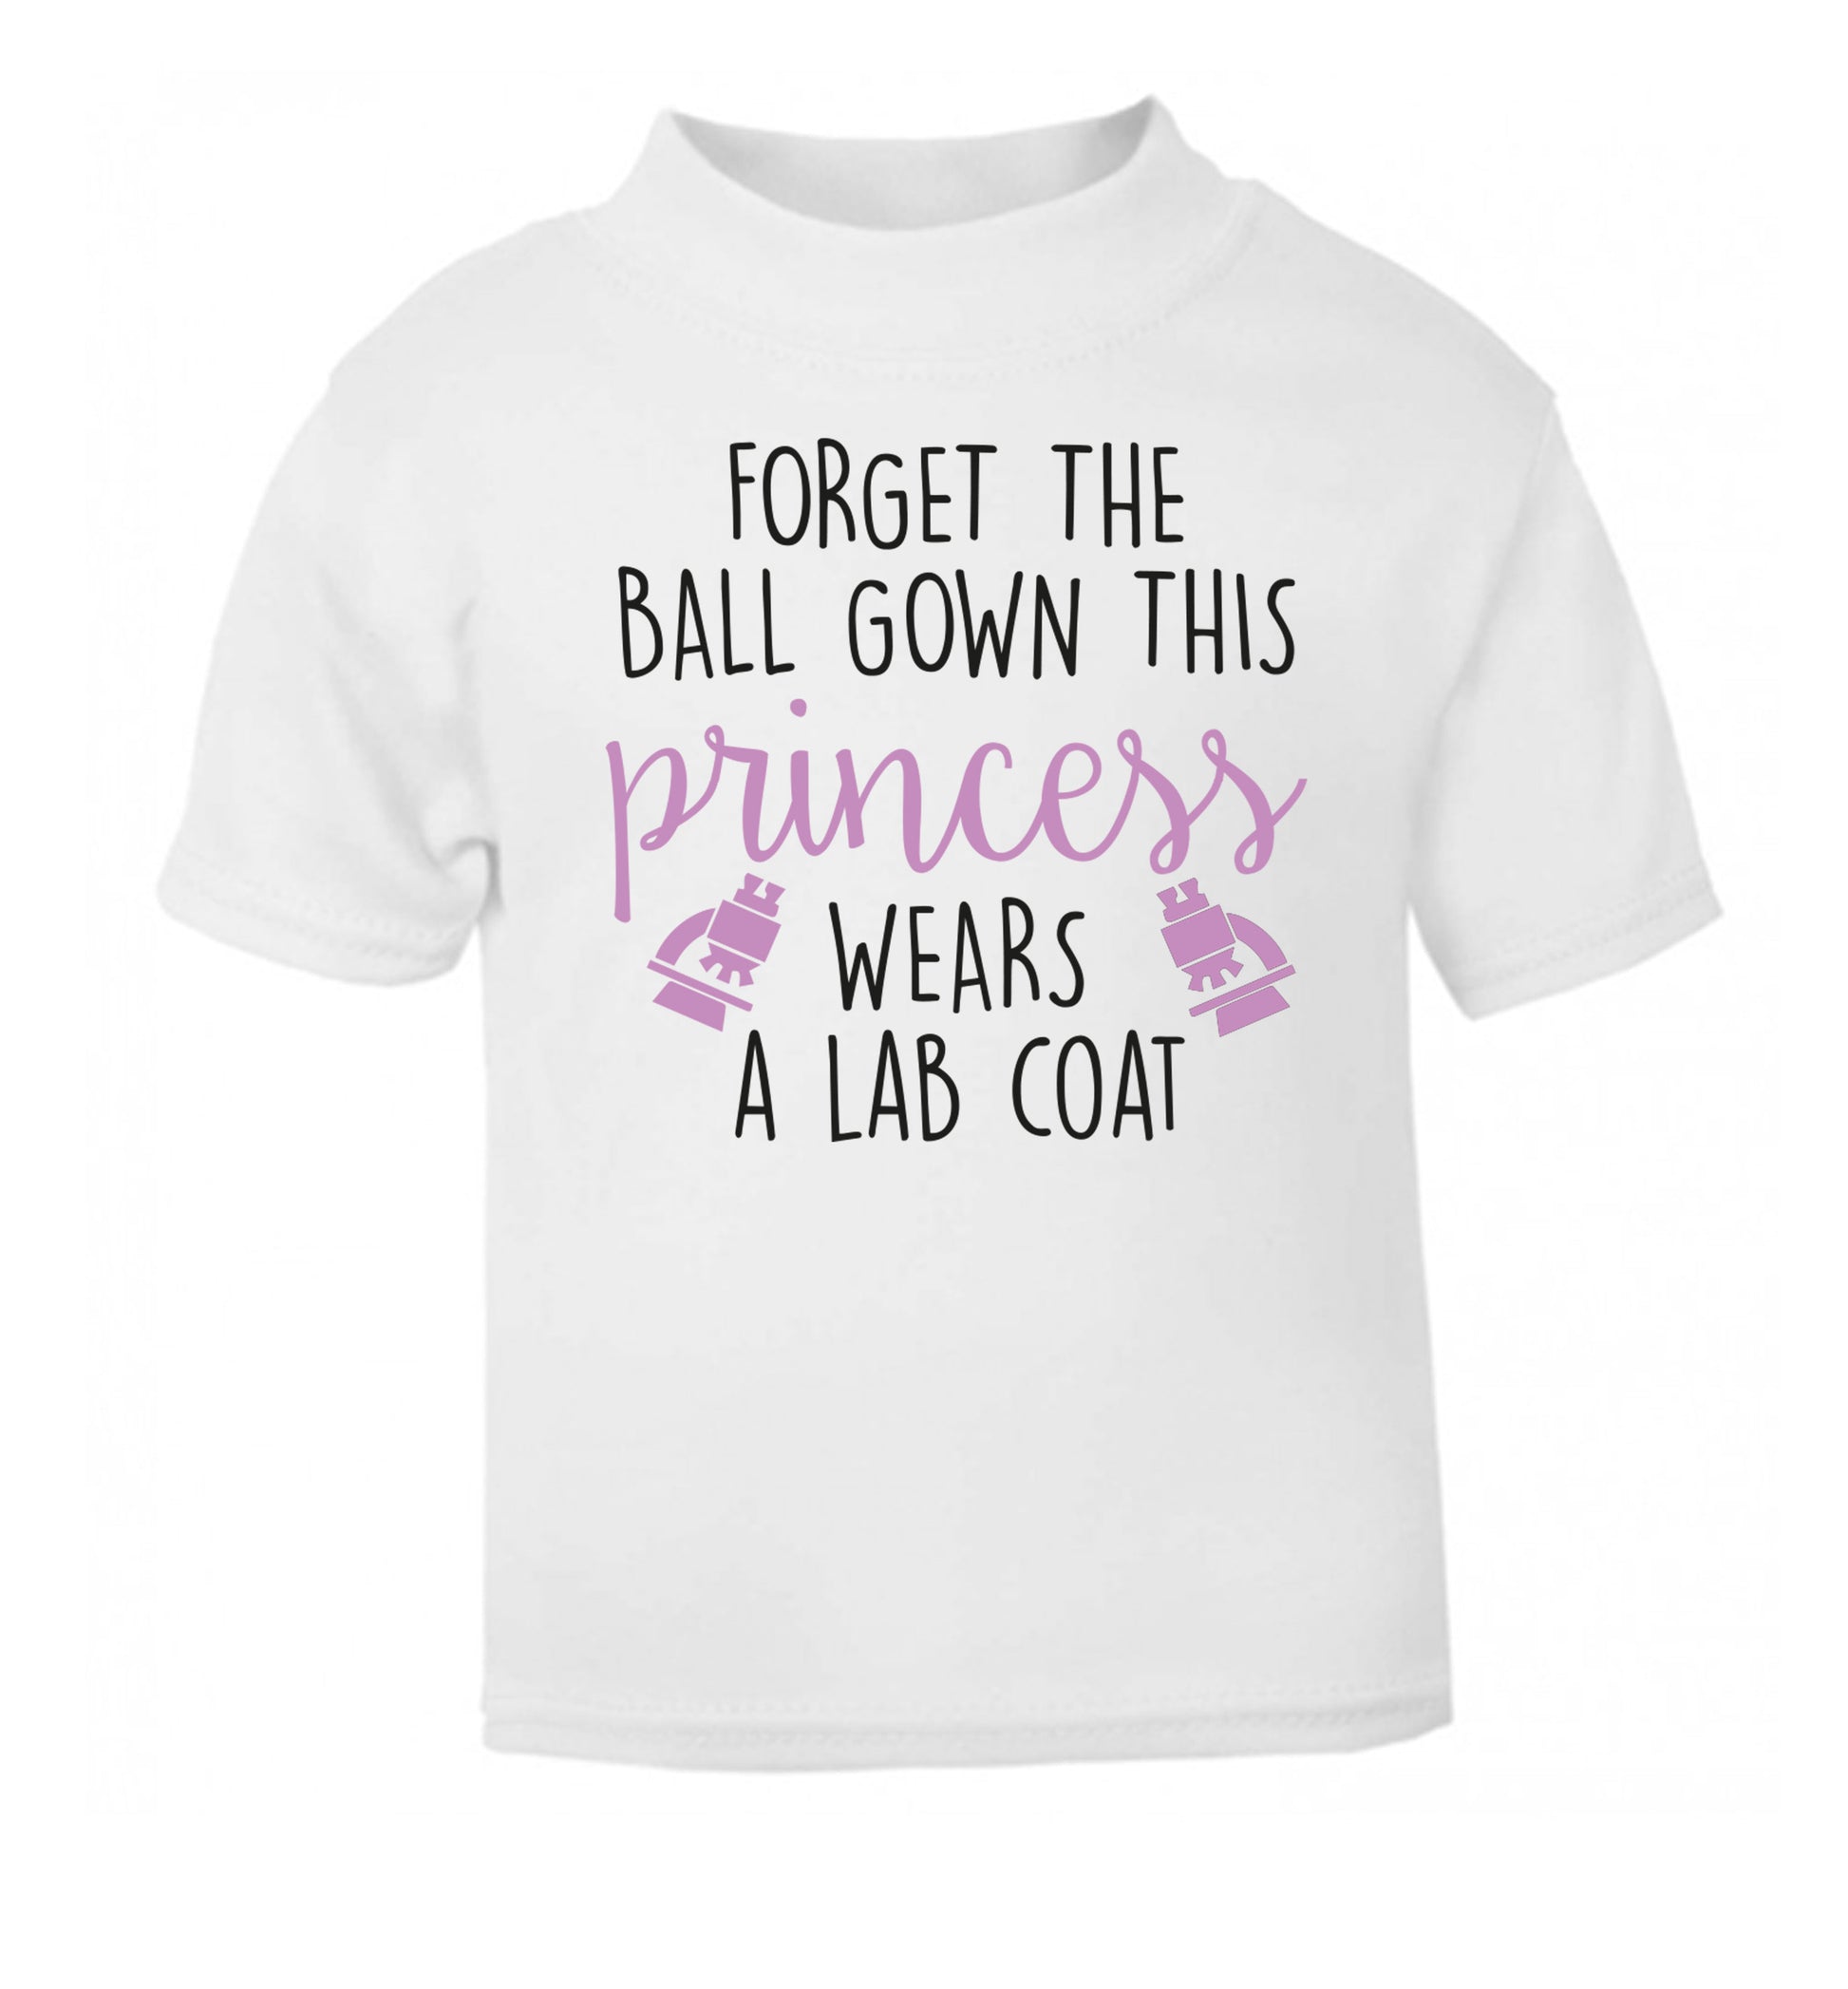 Forget the ball gown this princess wears a lab coat white Baby Toddler Tshirt 2 Years